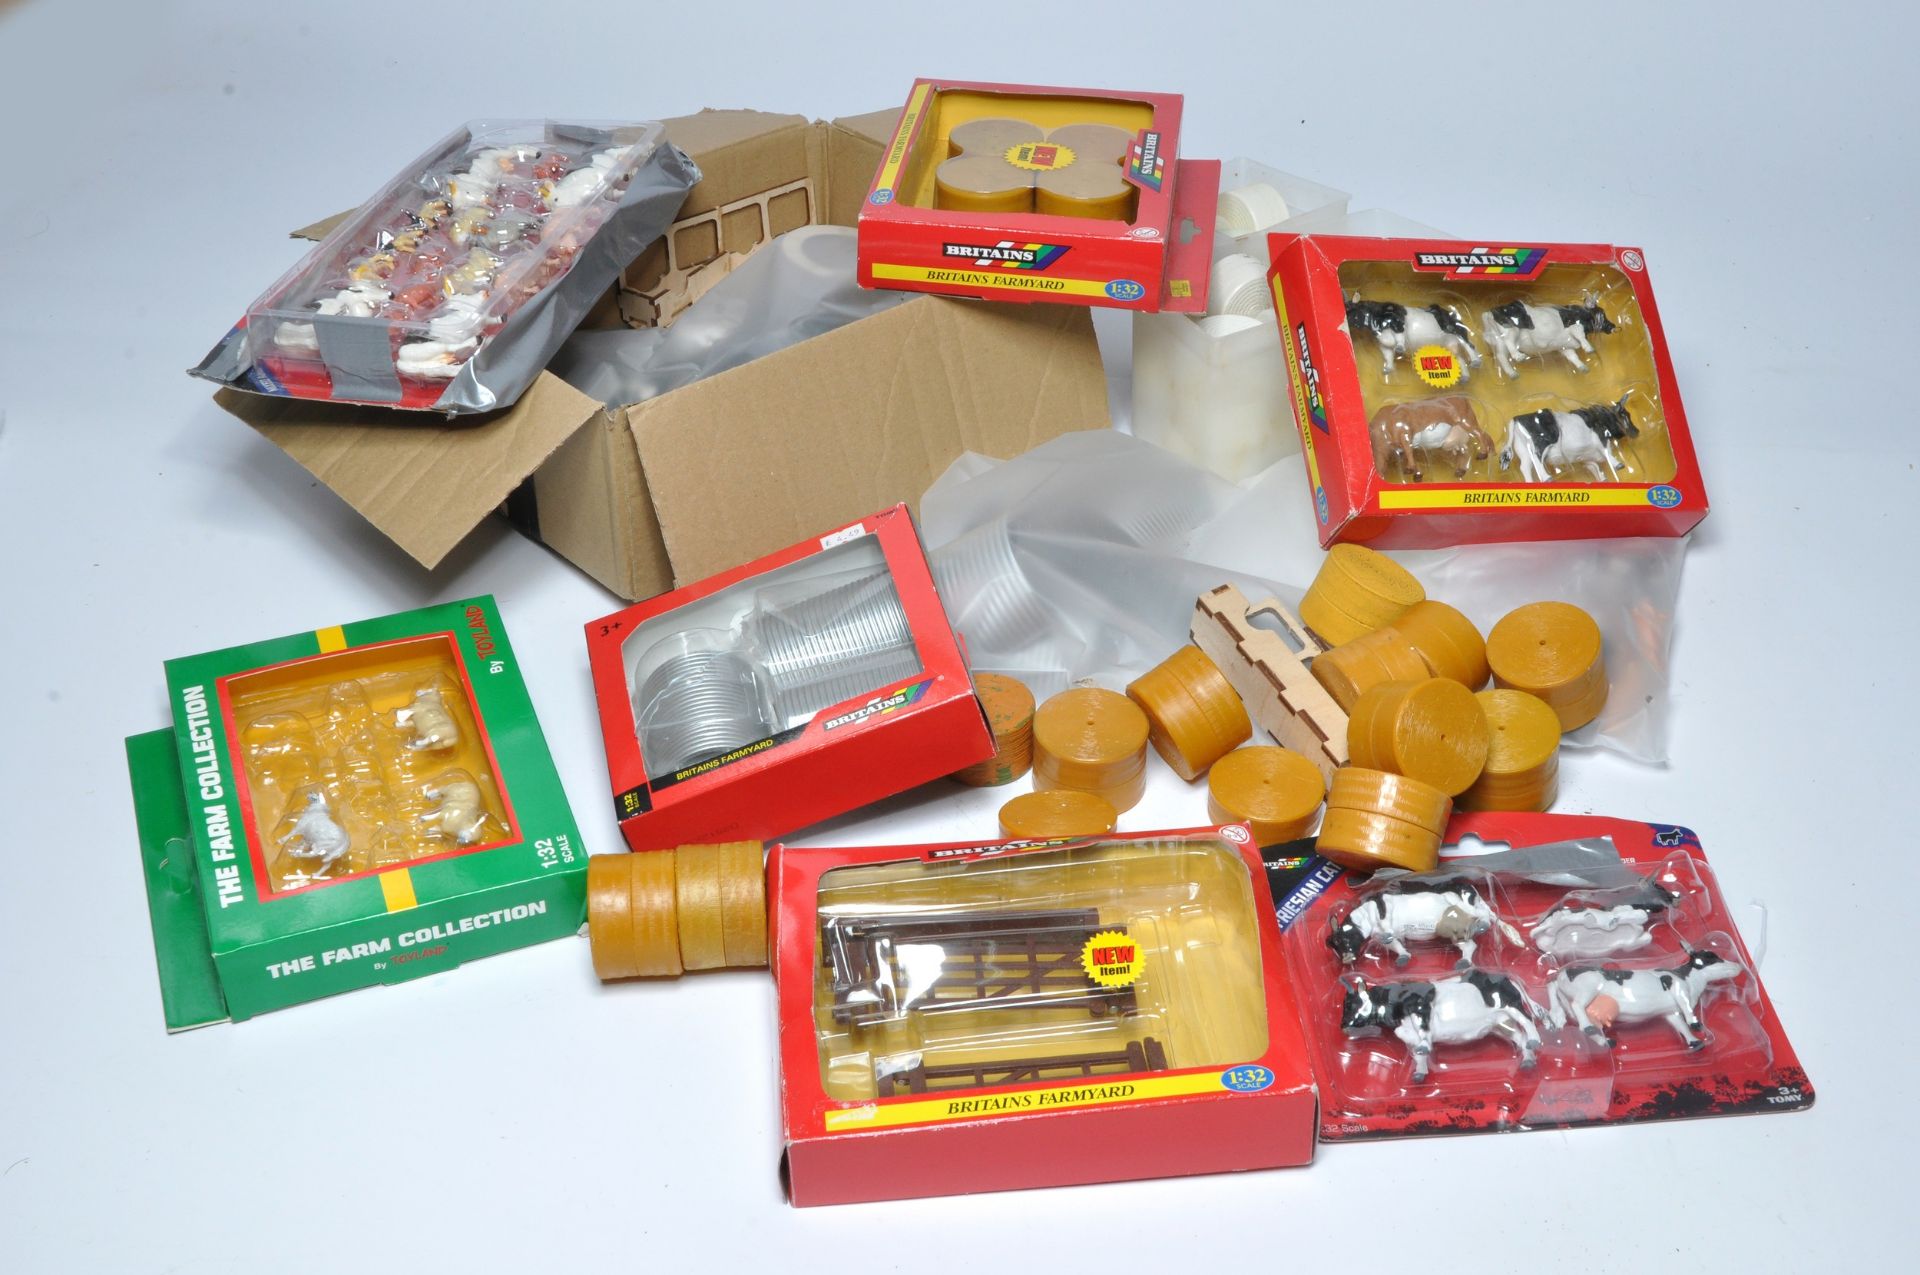 Assorted Farm Model Accessories including Buildings, Bales, Animal figures etc. Some boxed, boxes